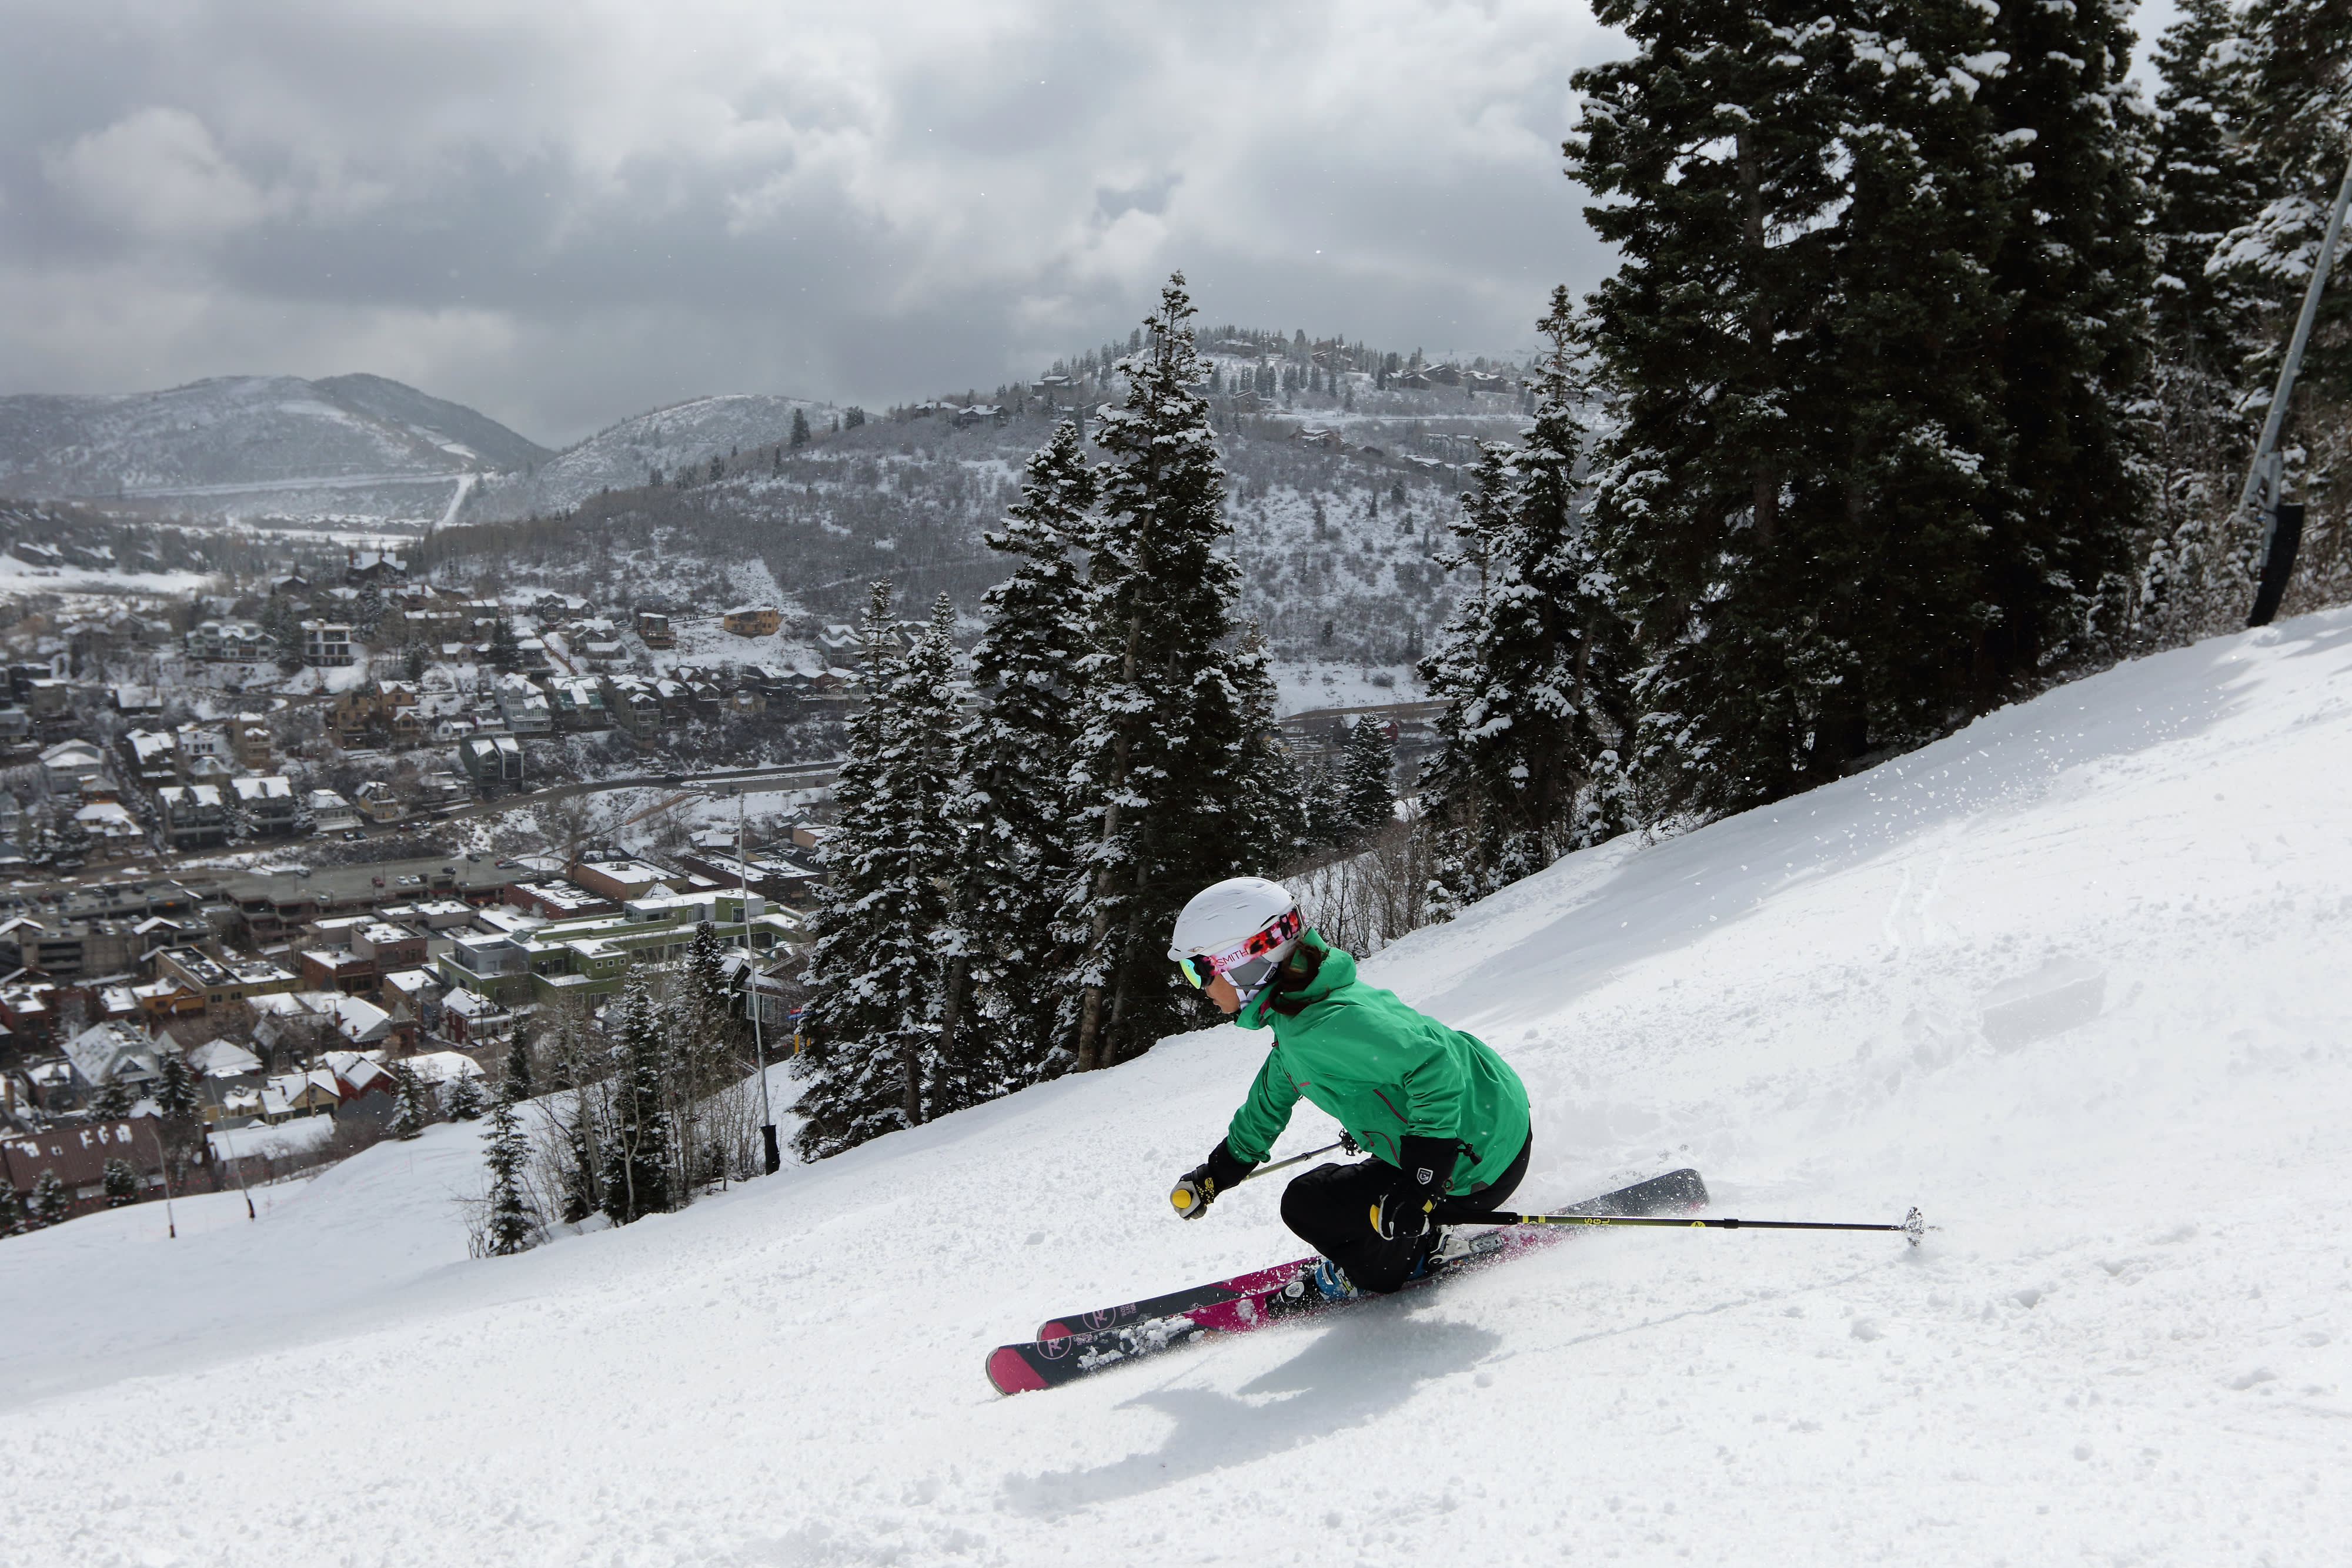 5 Ways to Ski More for Less